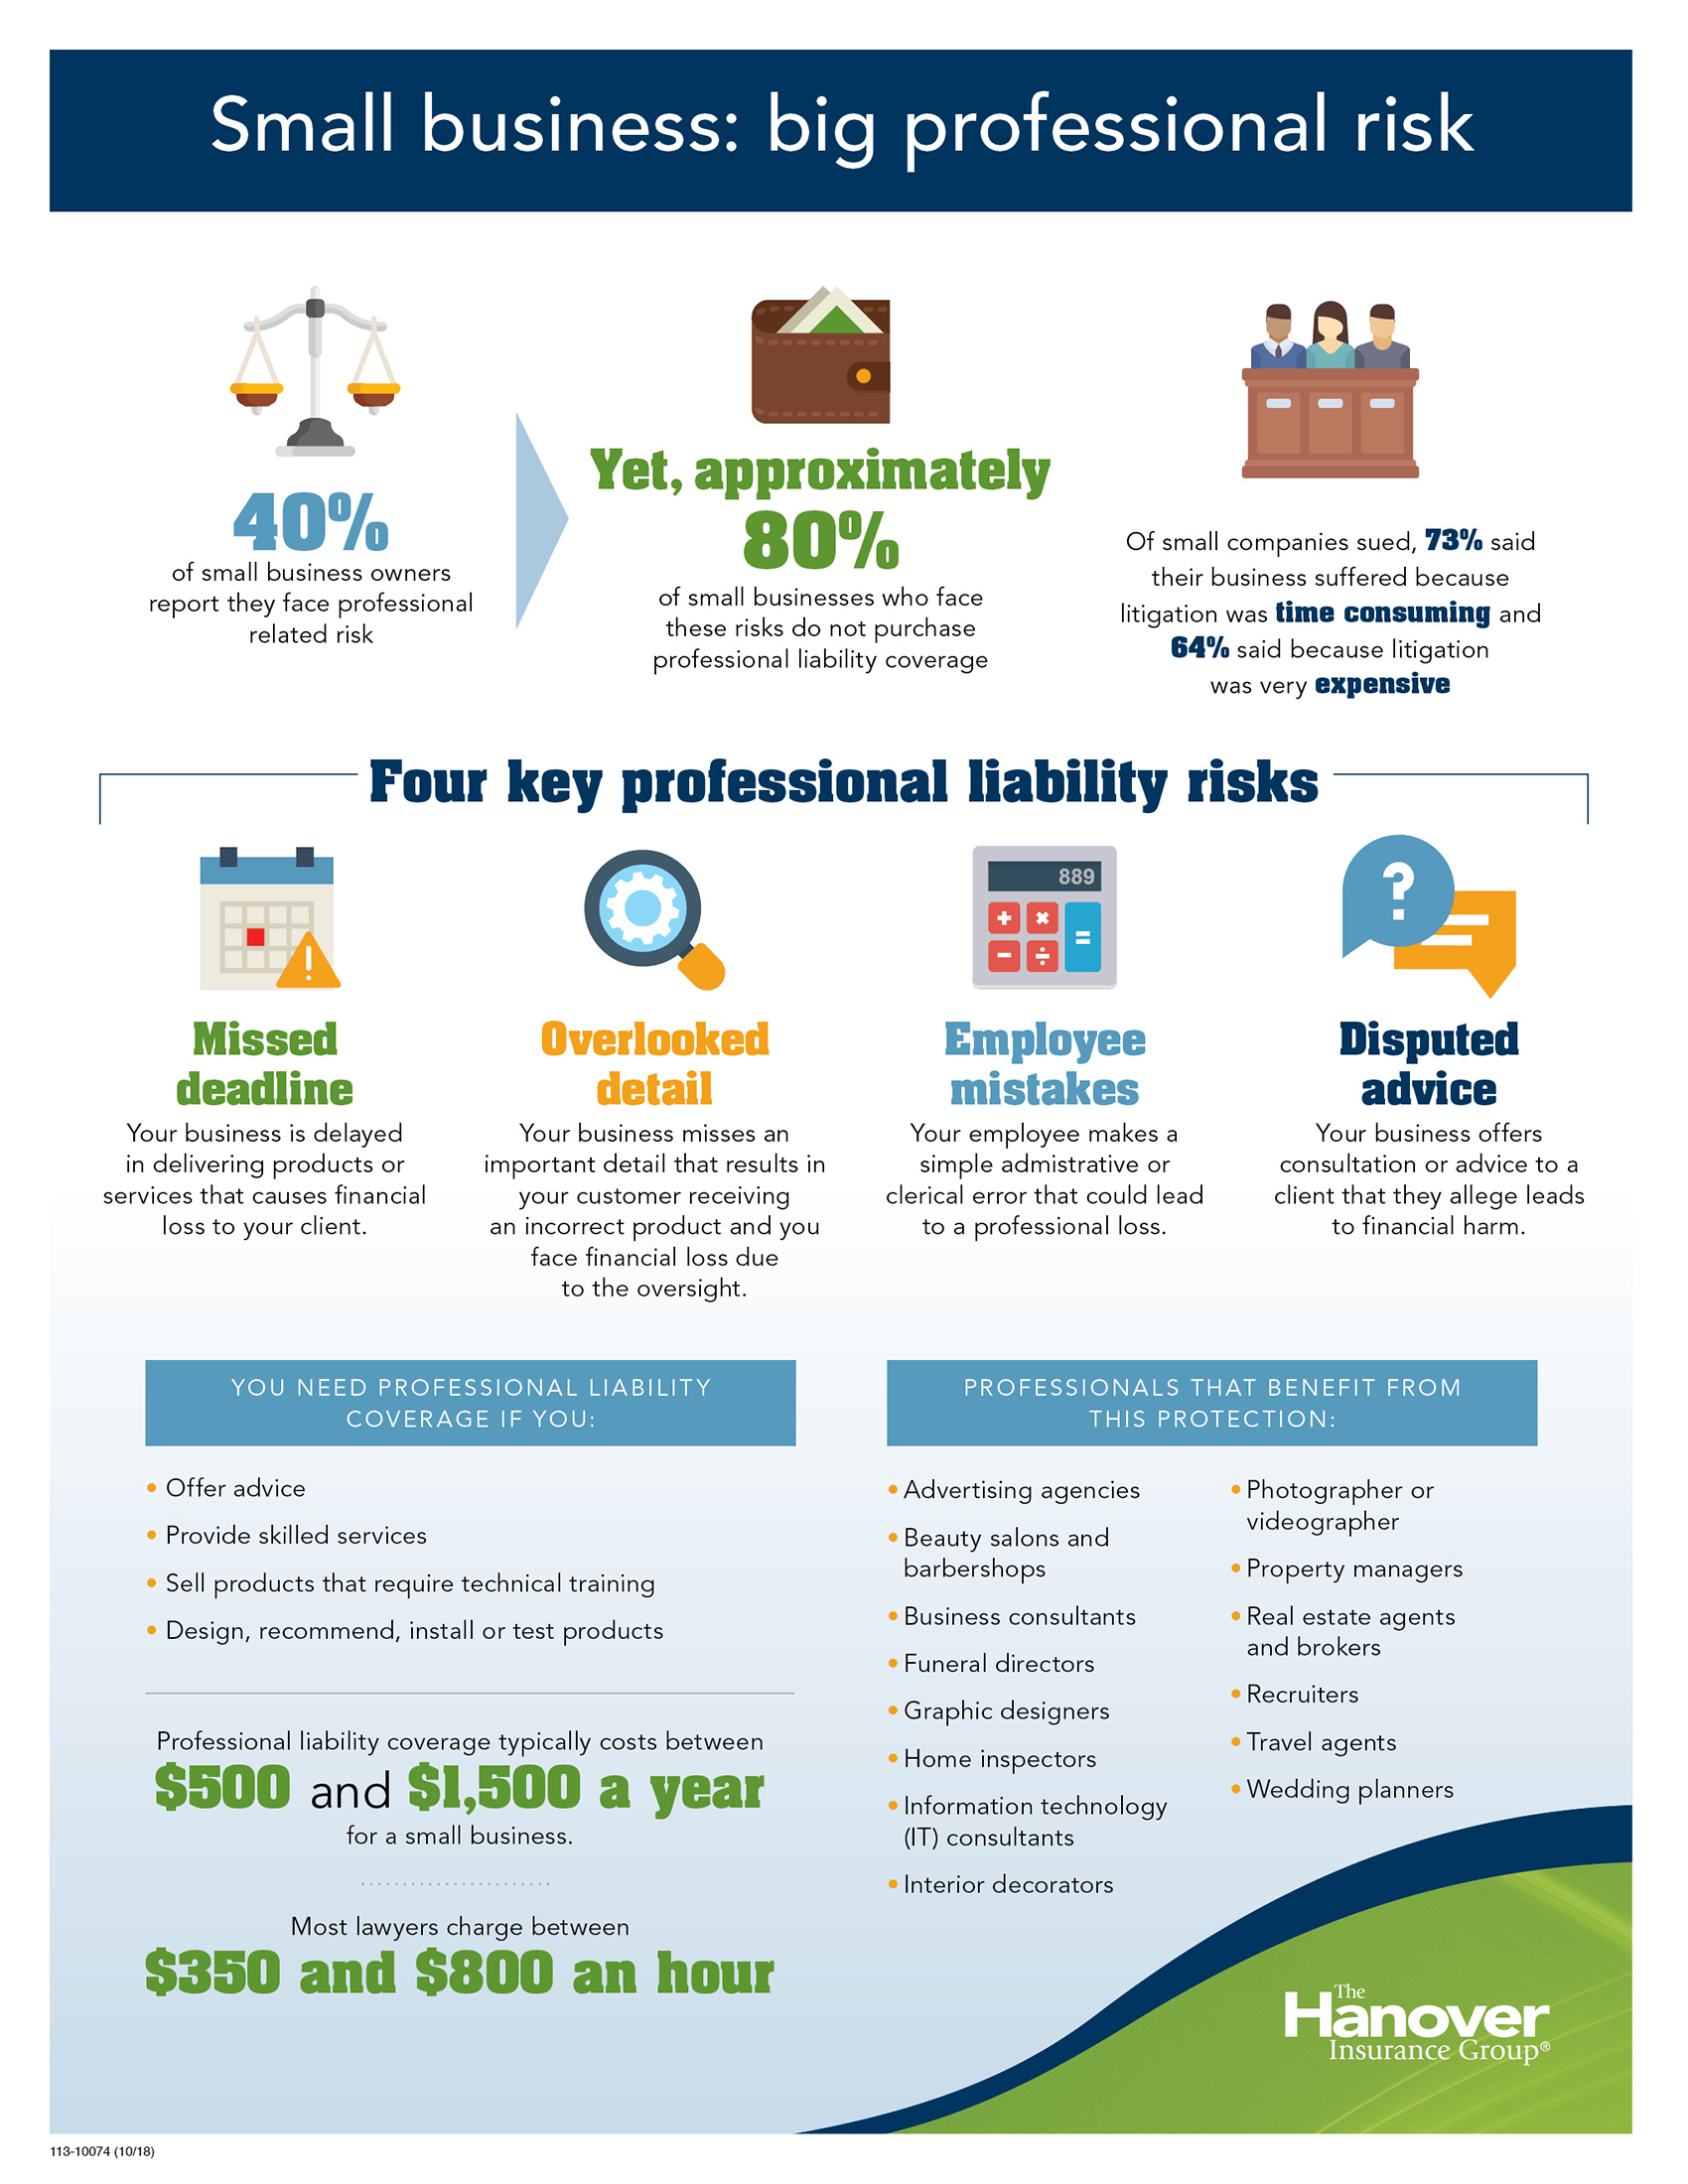 Why small business owners need professional liability protection